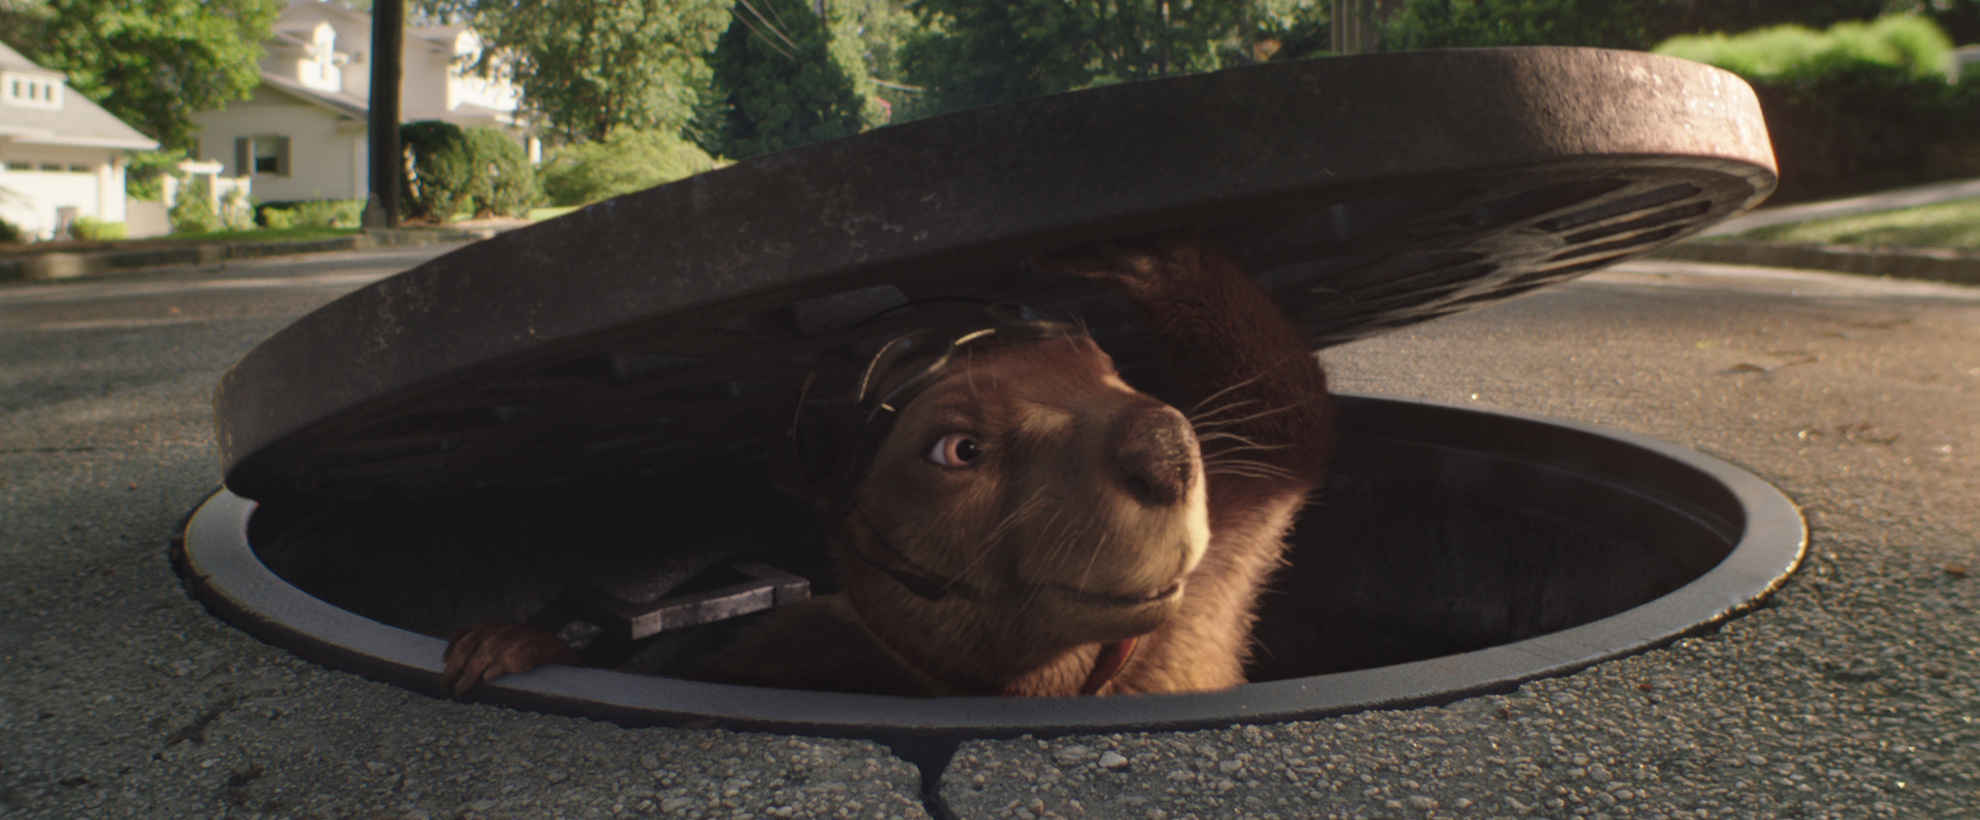 An animated beaver peeks out from underneath a manhole over on a suburban road